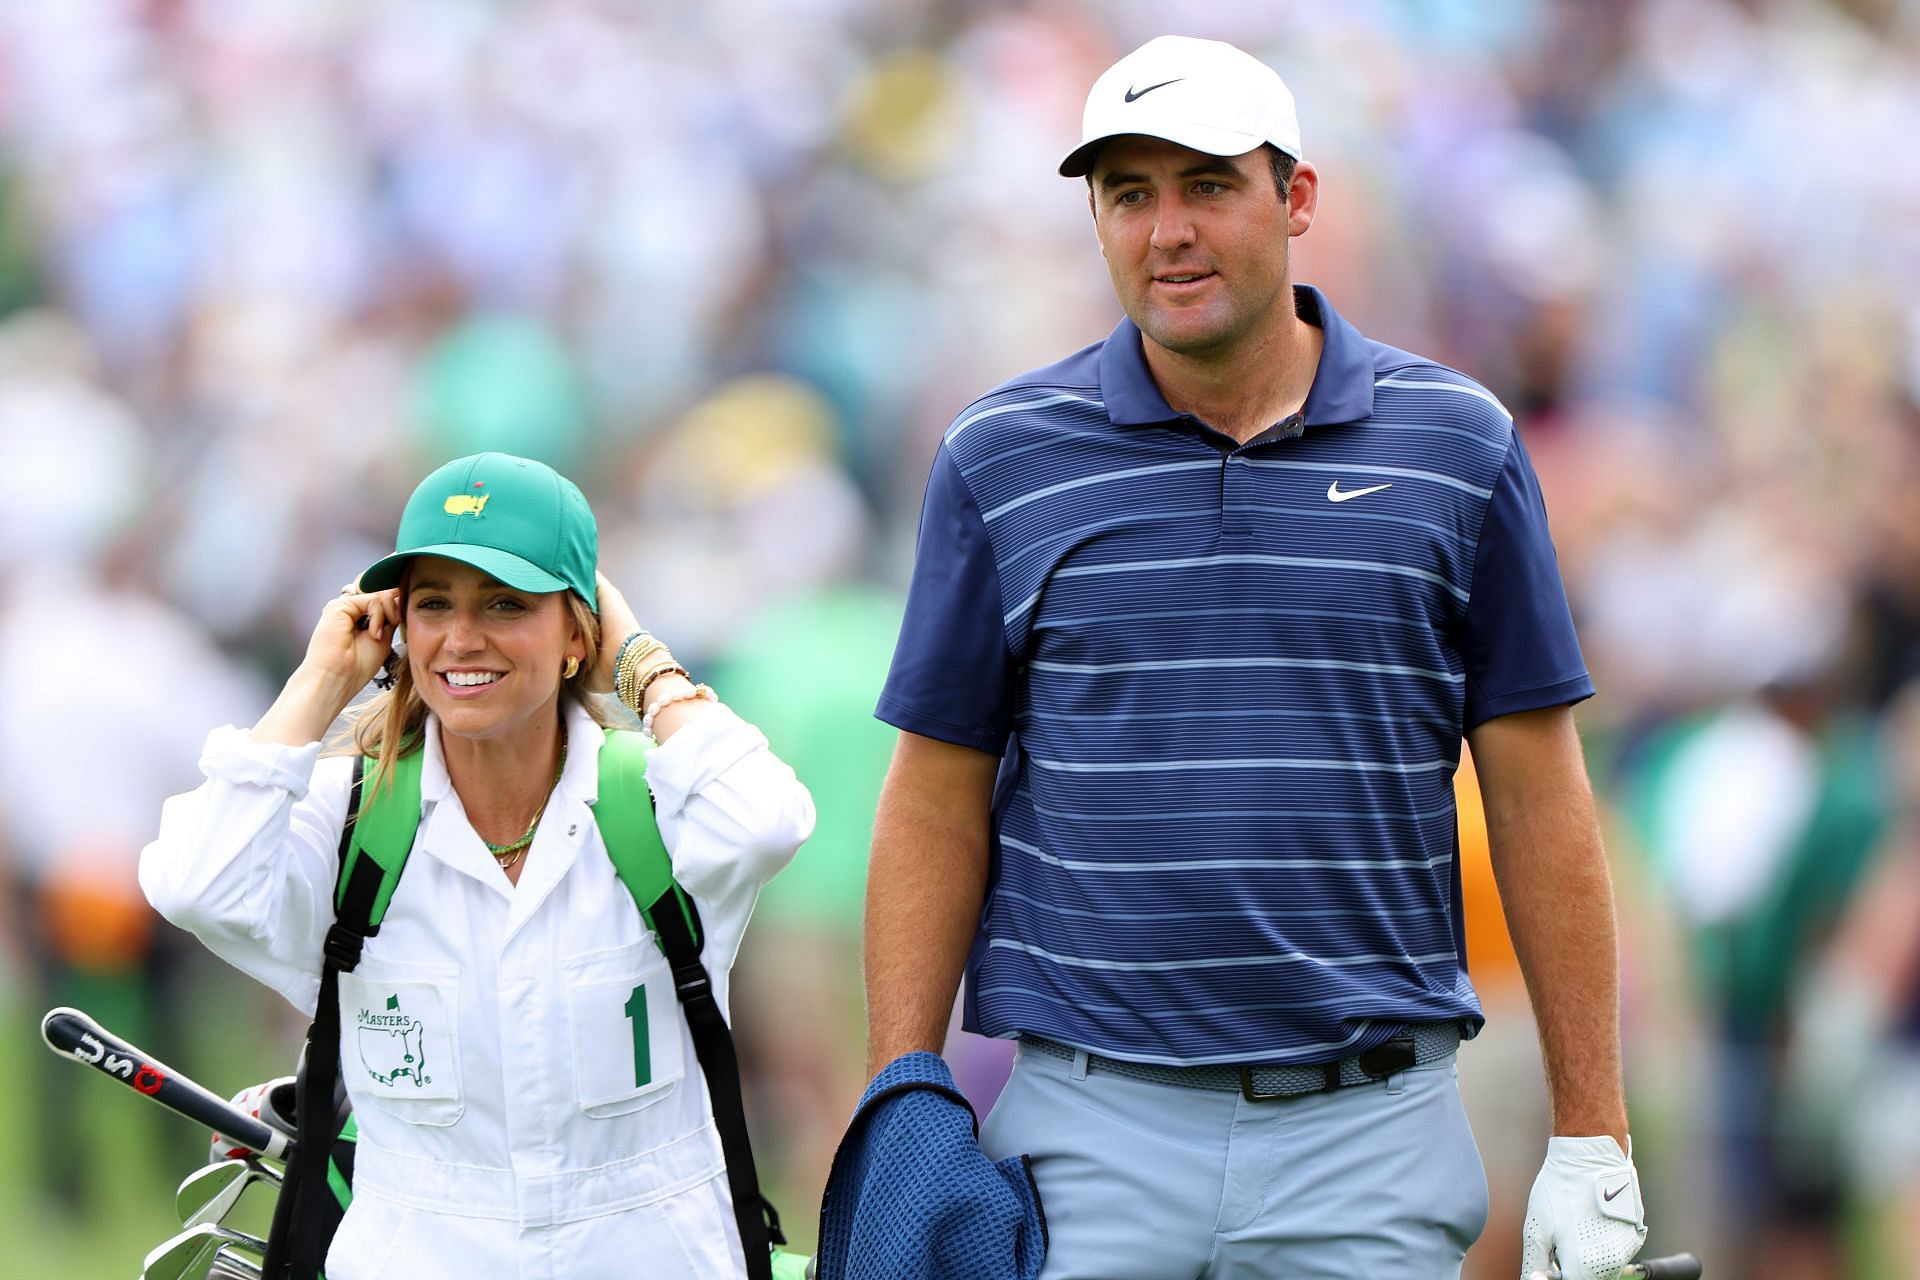 Scottie Scheffler and Meredith at The Masters - Preview Day 3 (Photo by Andrew Redington/Getty Images)